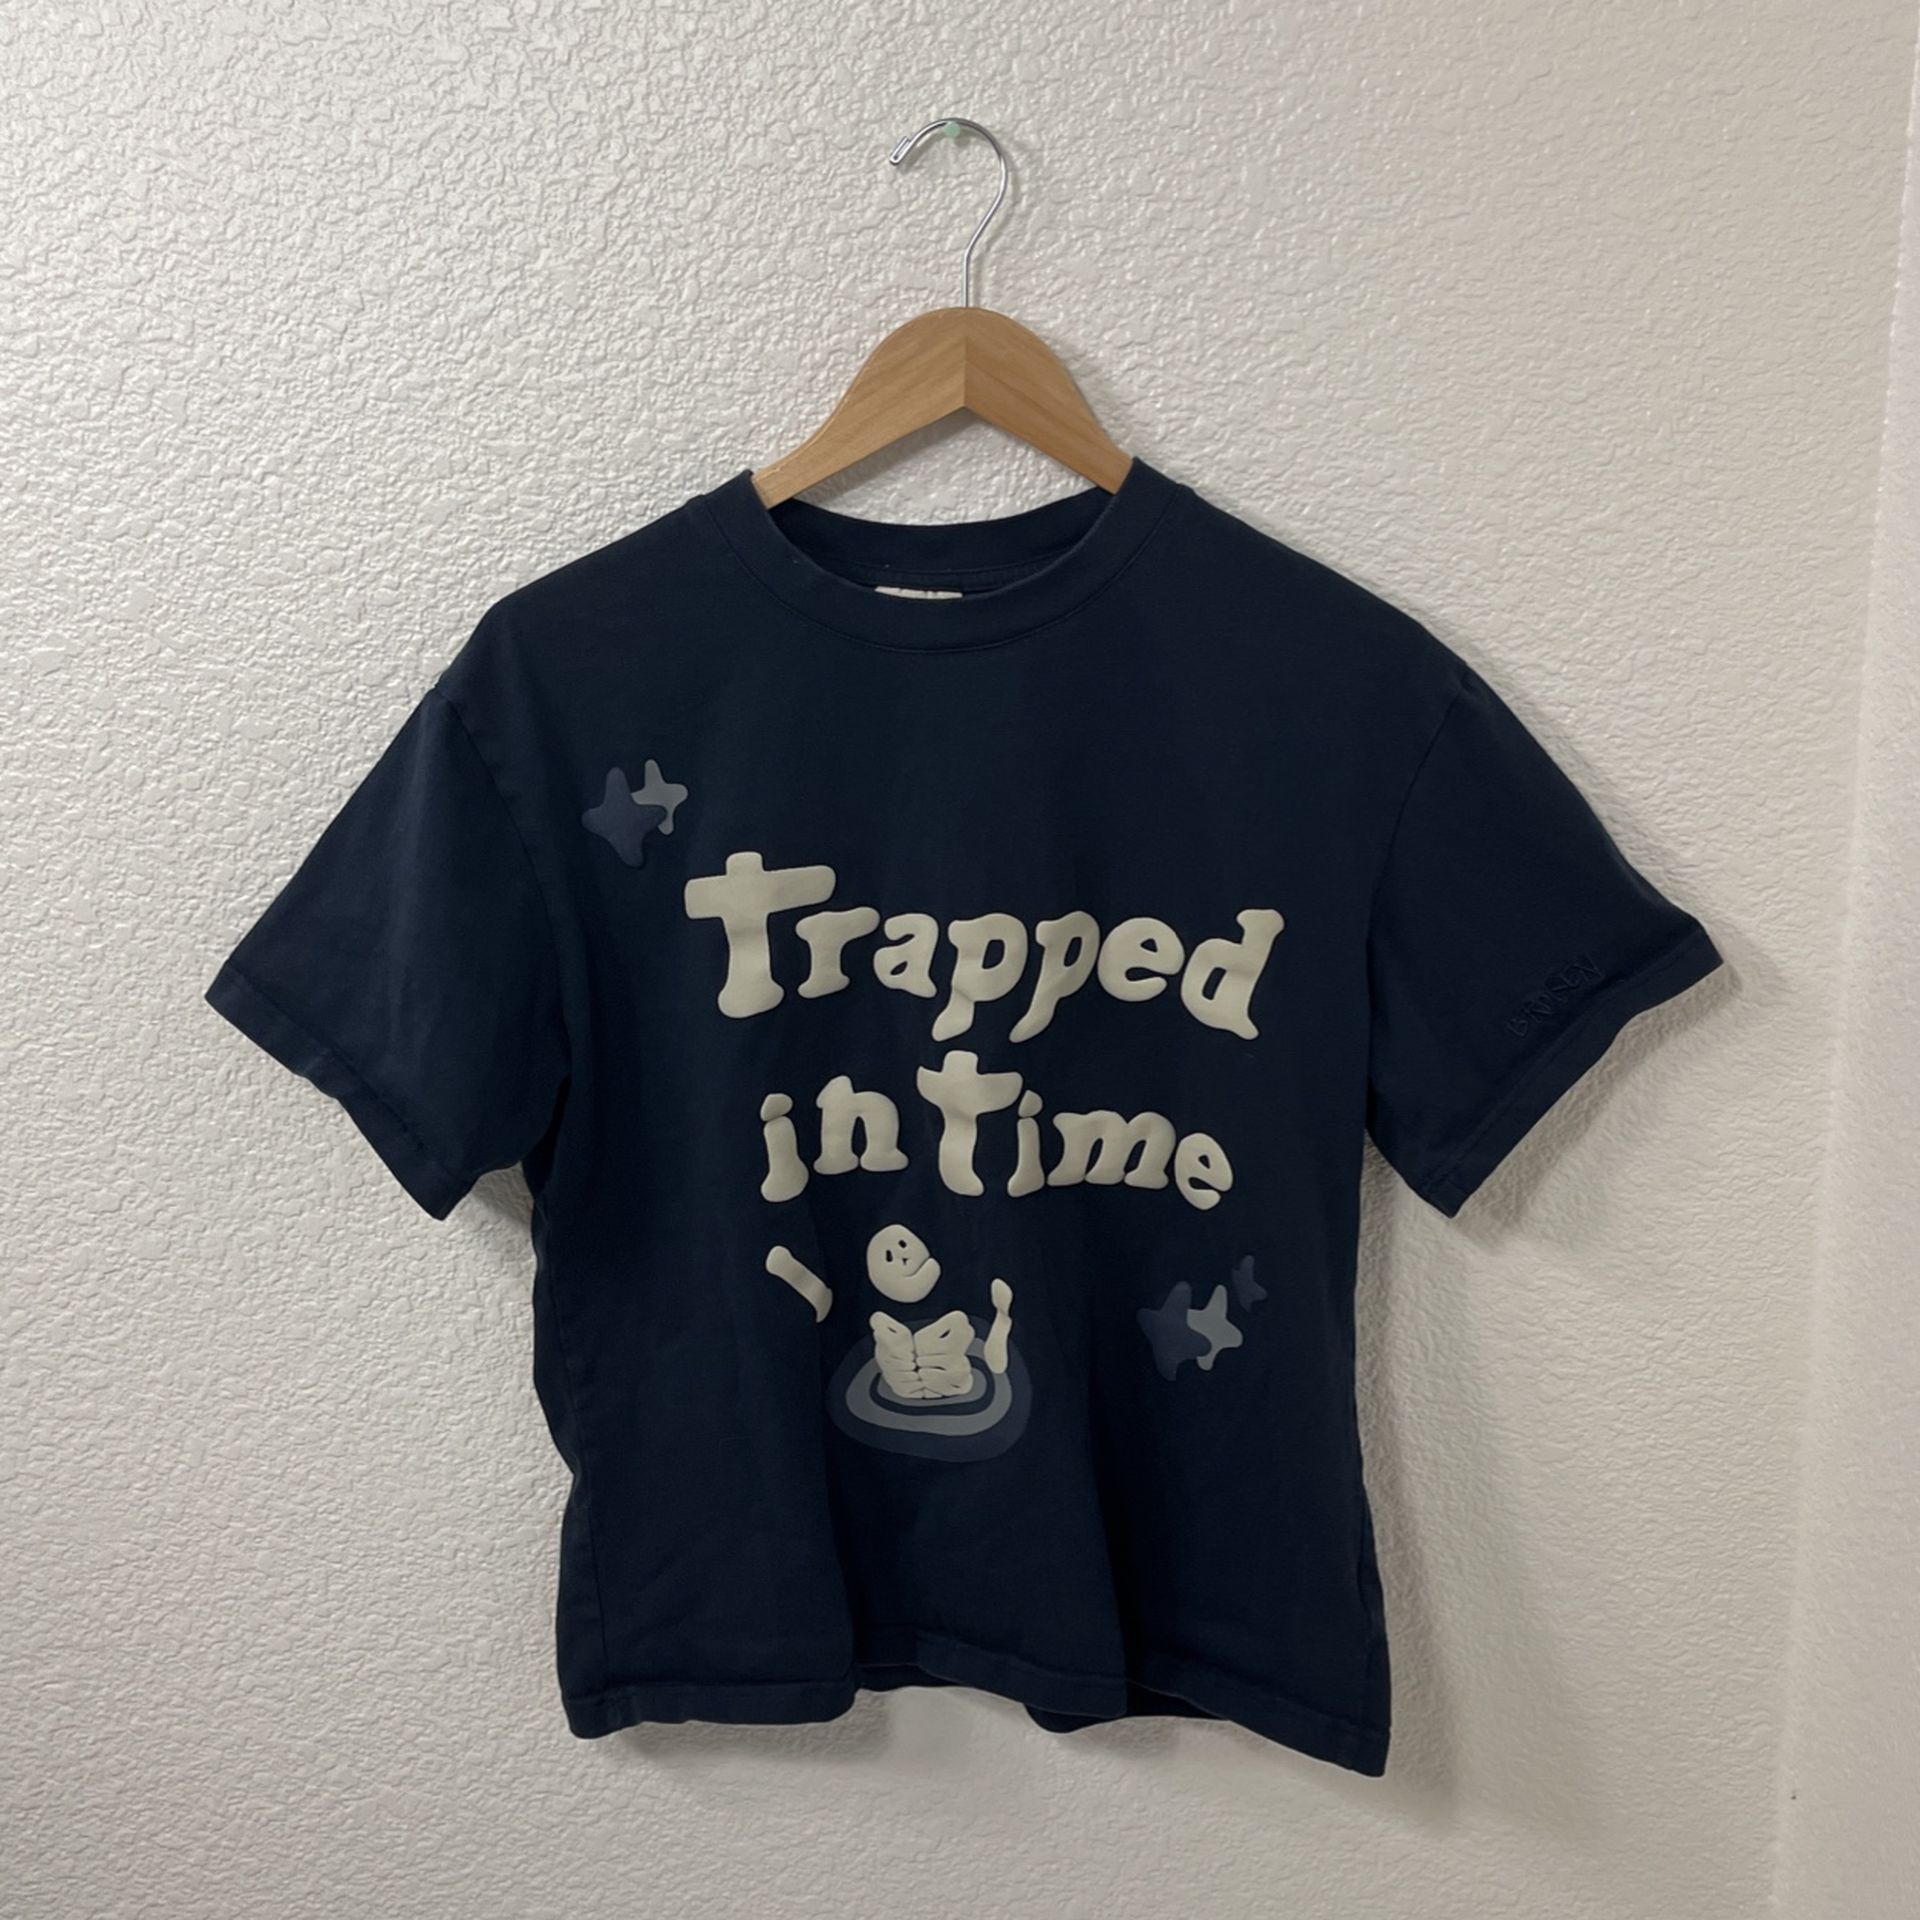 Broken Planet - Trapped In Time Tshirt Size XS Men’s 